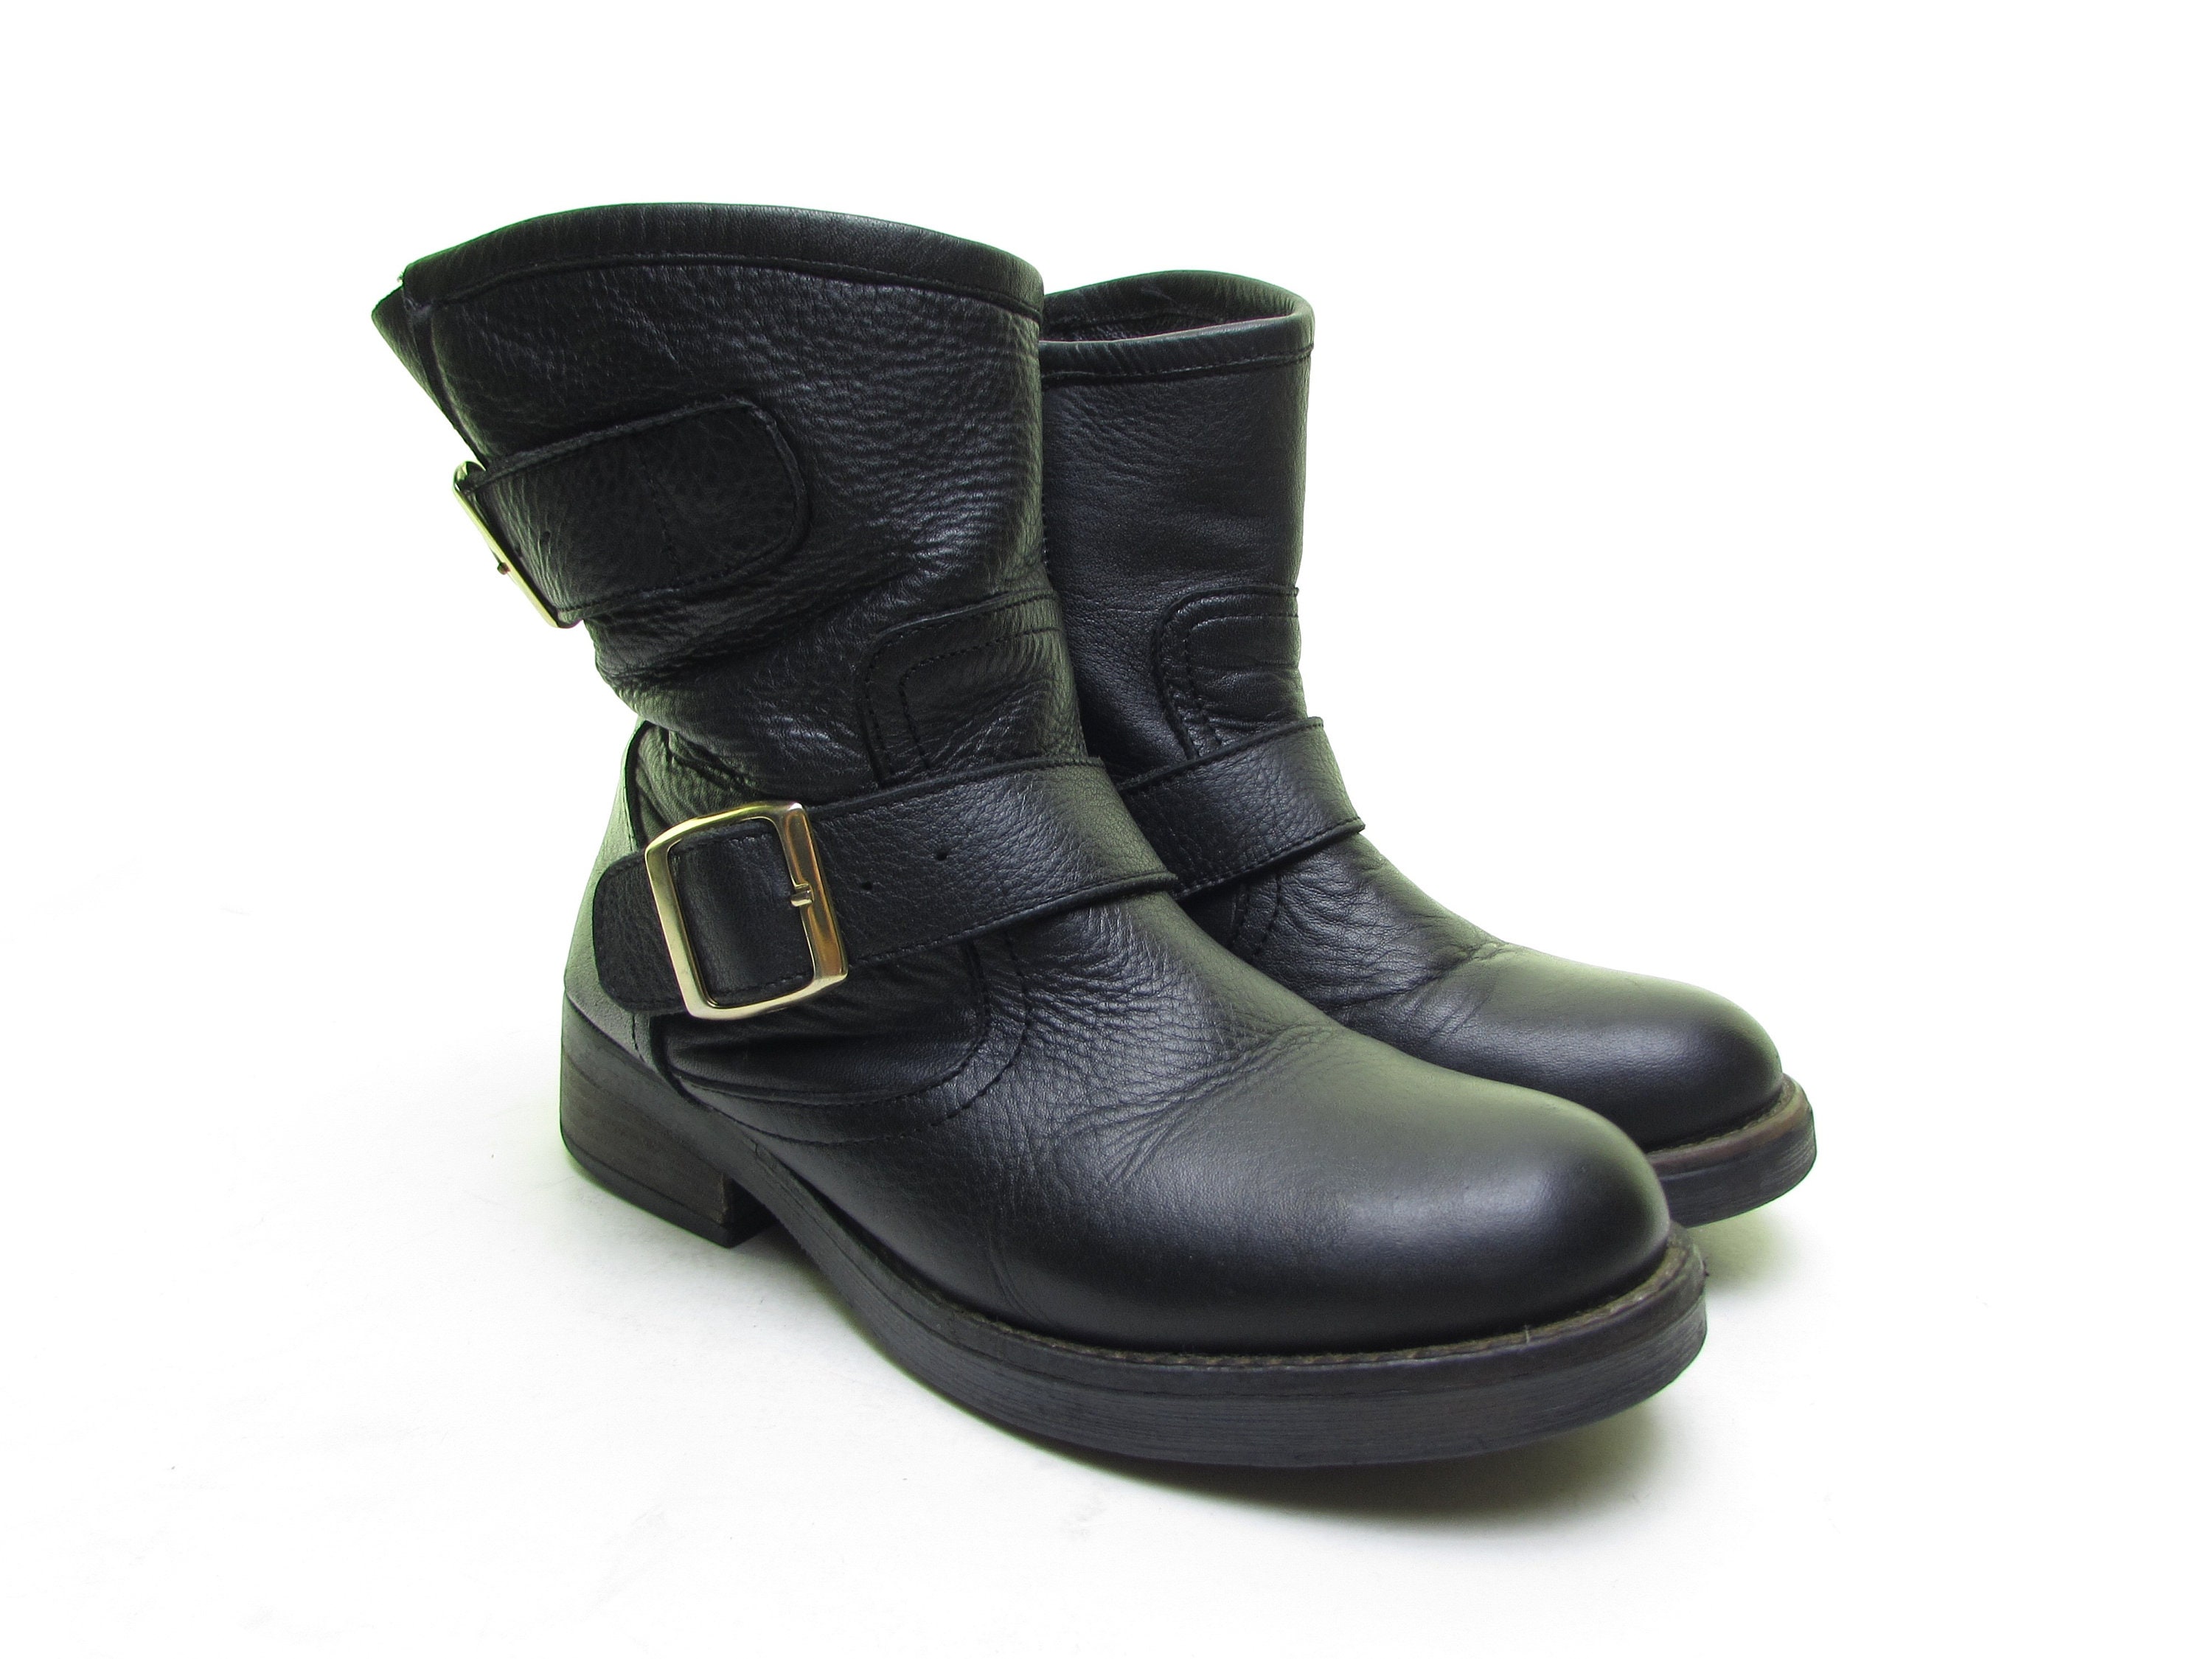 STEVE MADDEN Boots Black Leather Motorcycle Boots Buckle -